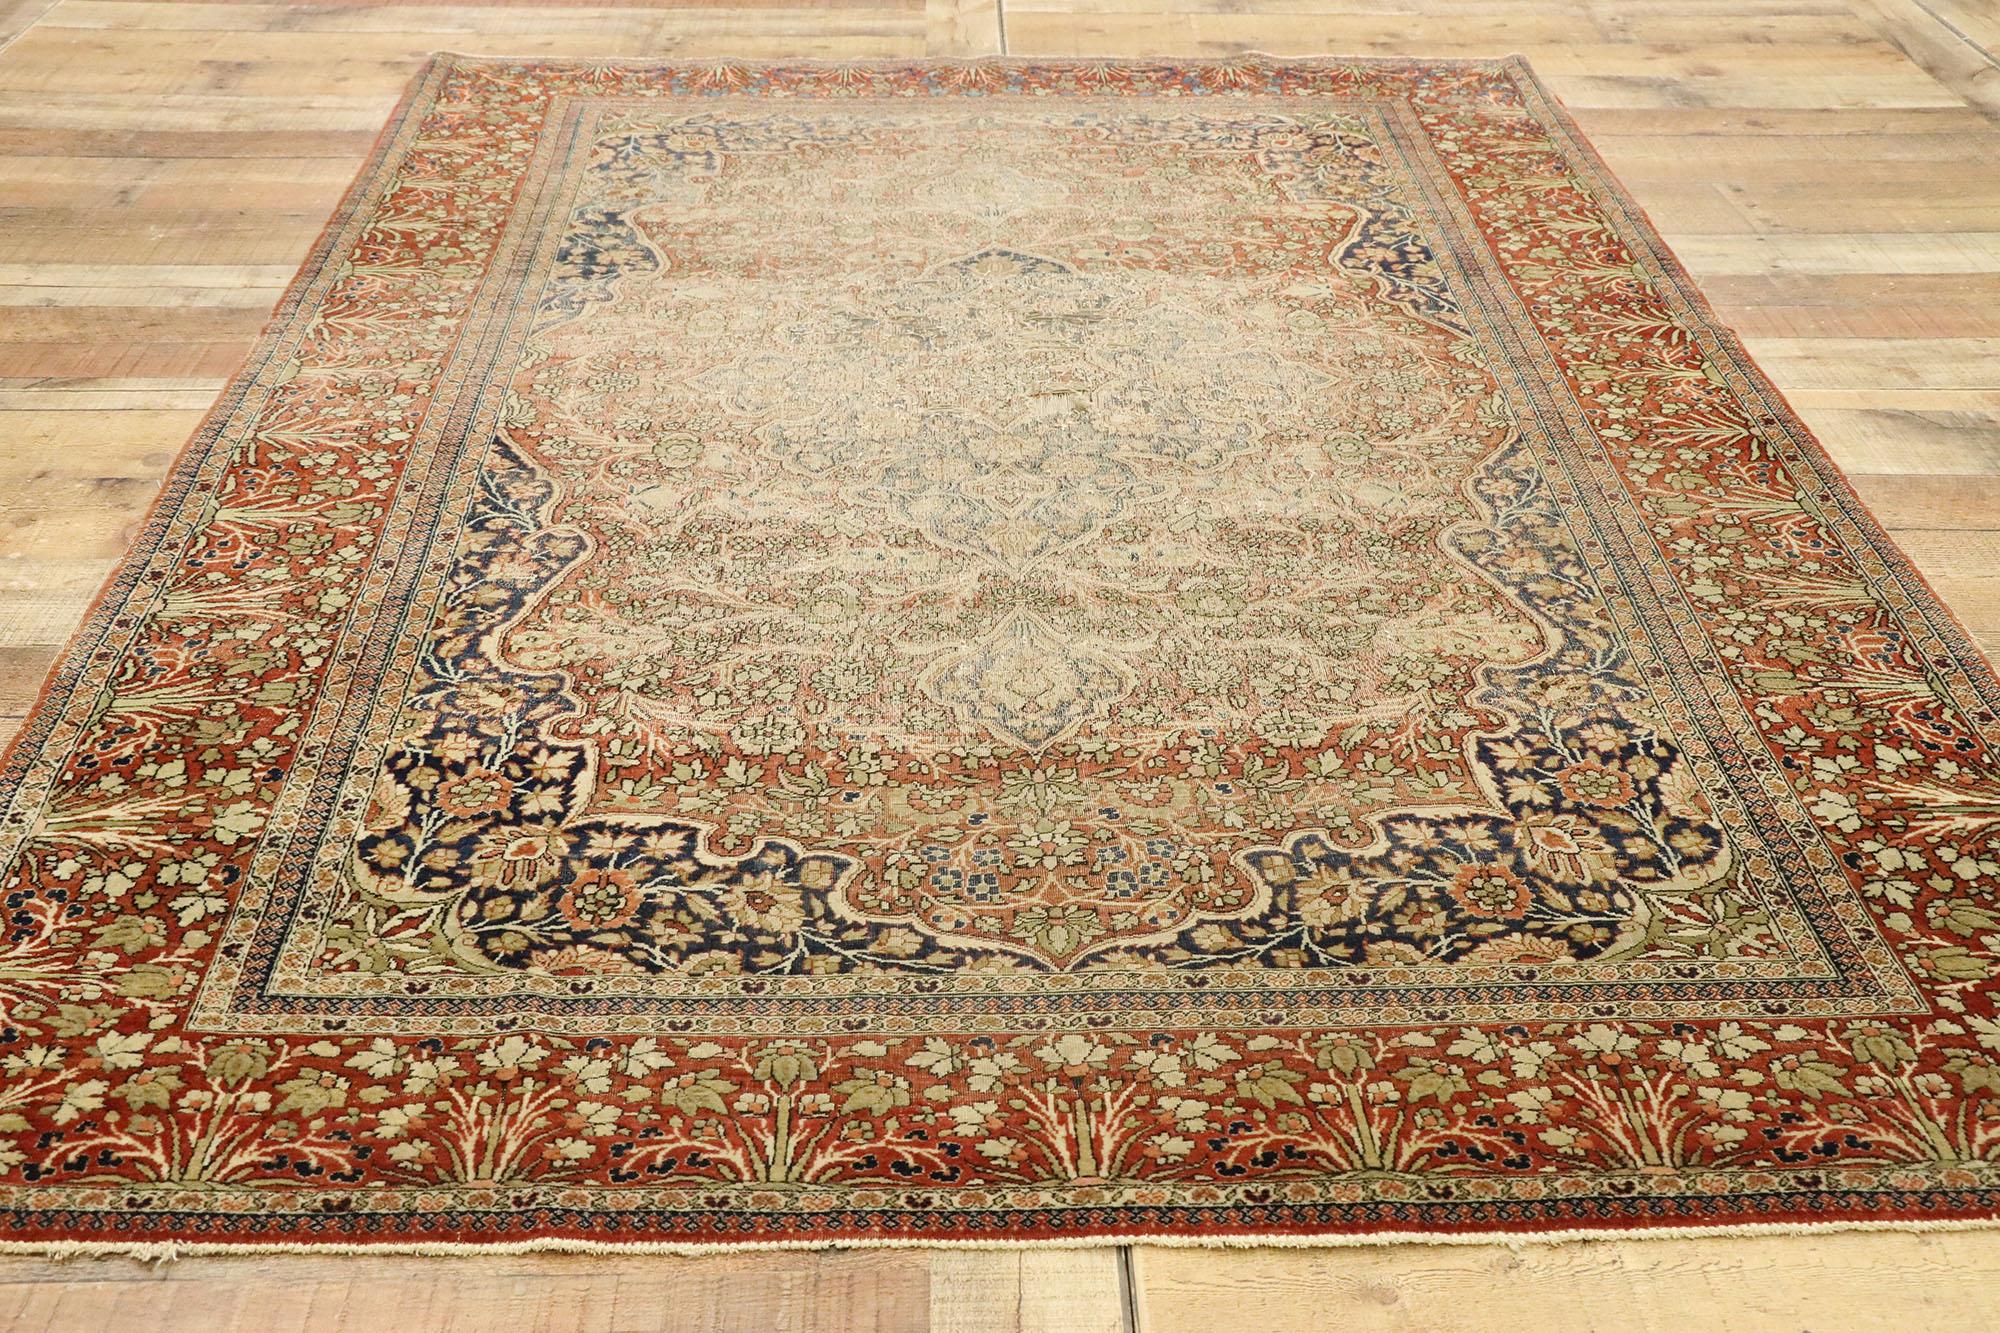 Distressed Antique Persian Mohtesham Kashan Rug with Modern Rustic English Style For Sale 1